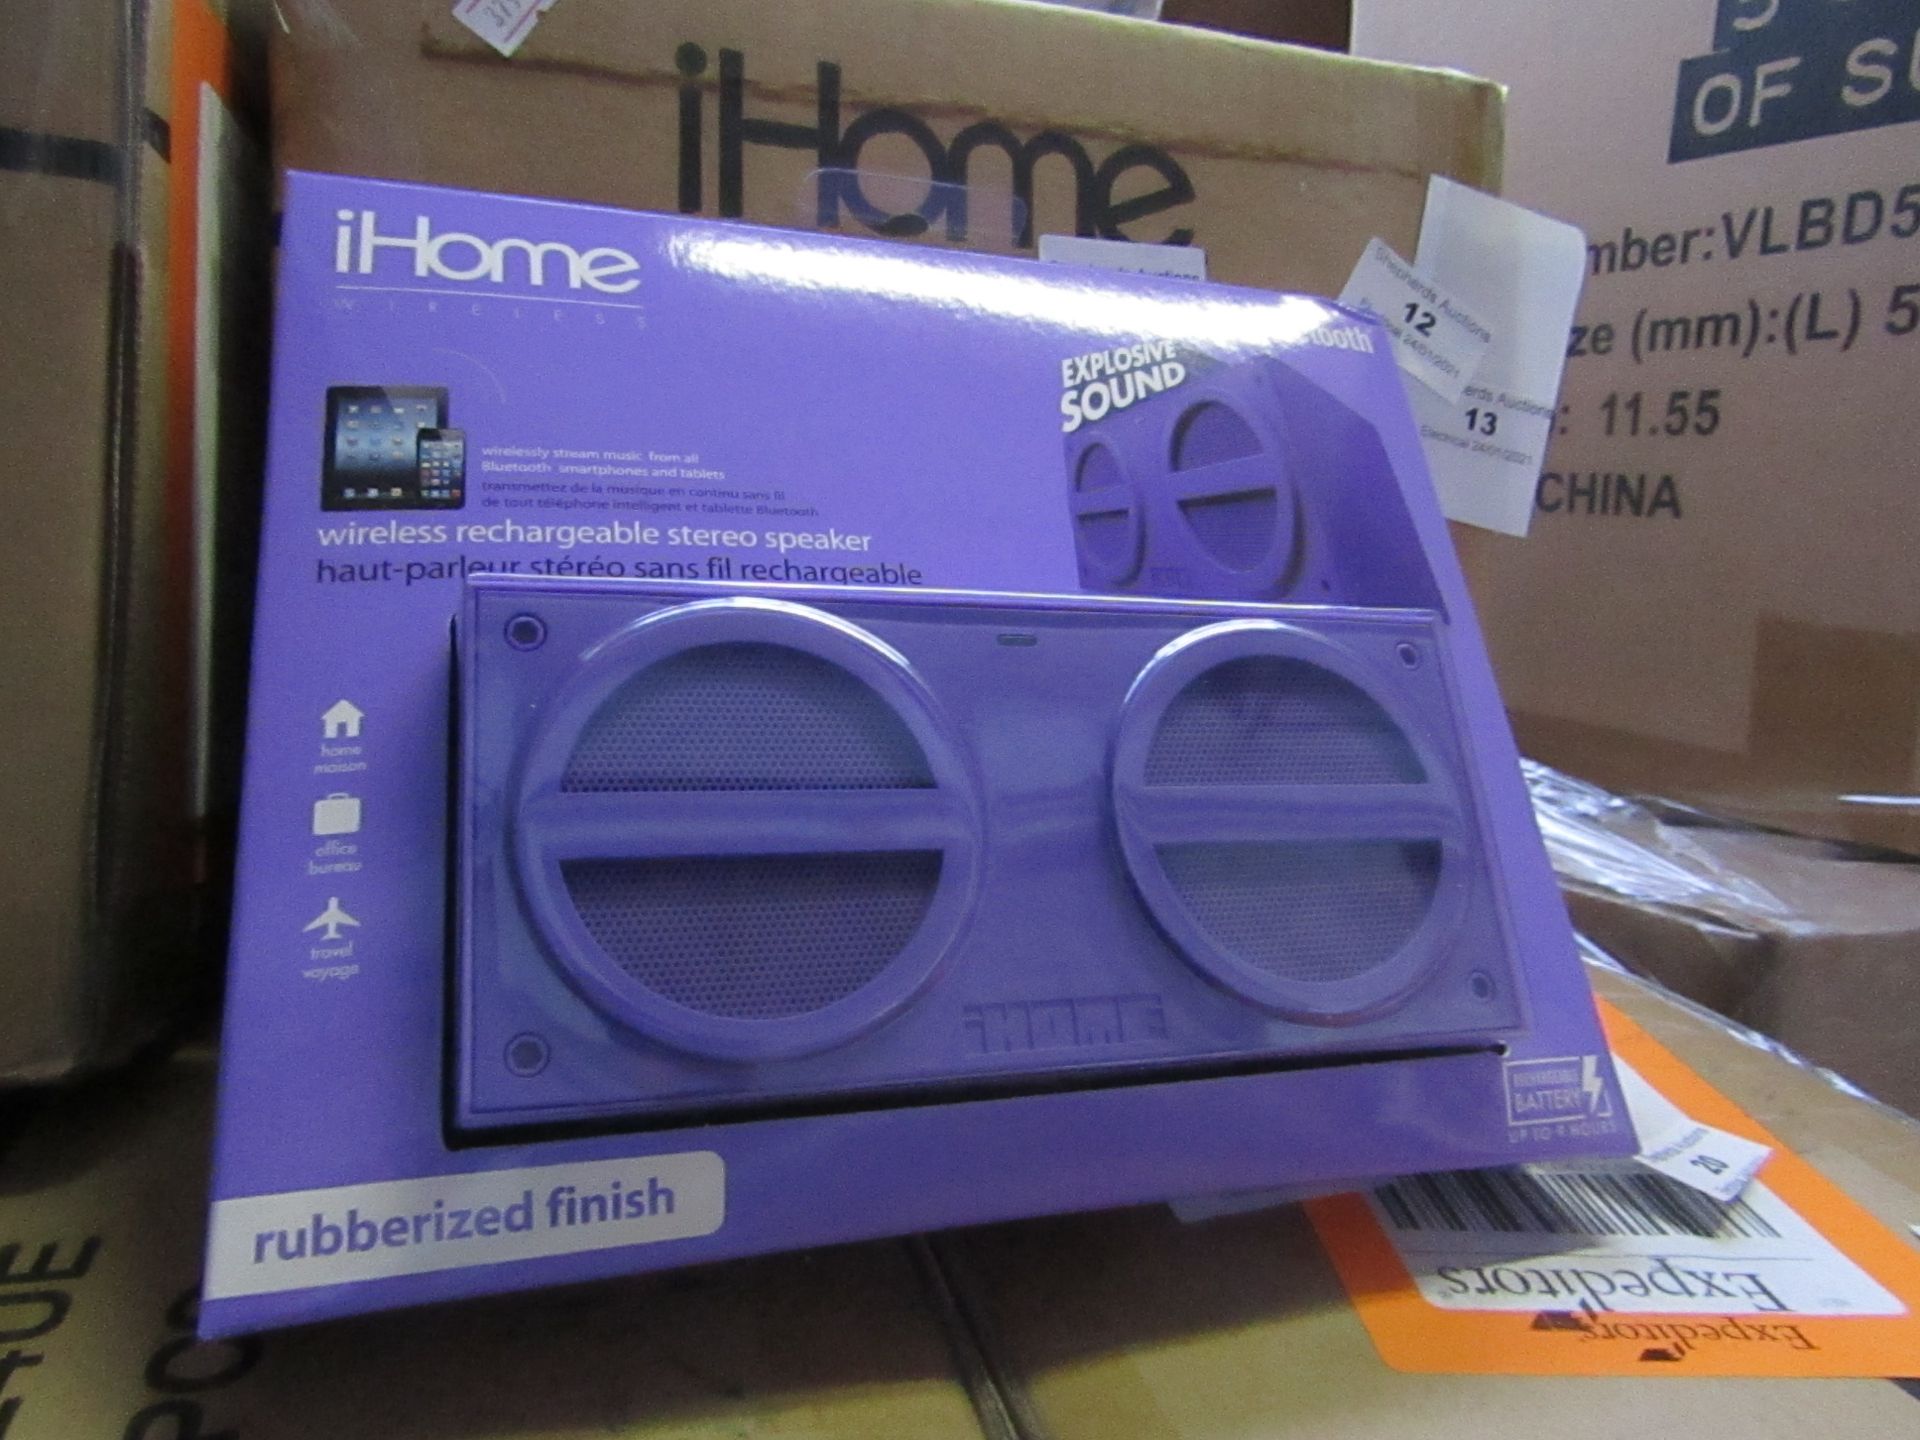 4x iHome, Wireless Rechargeable Stereo Speaker, New and Boxed